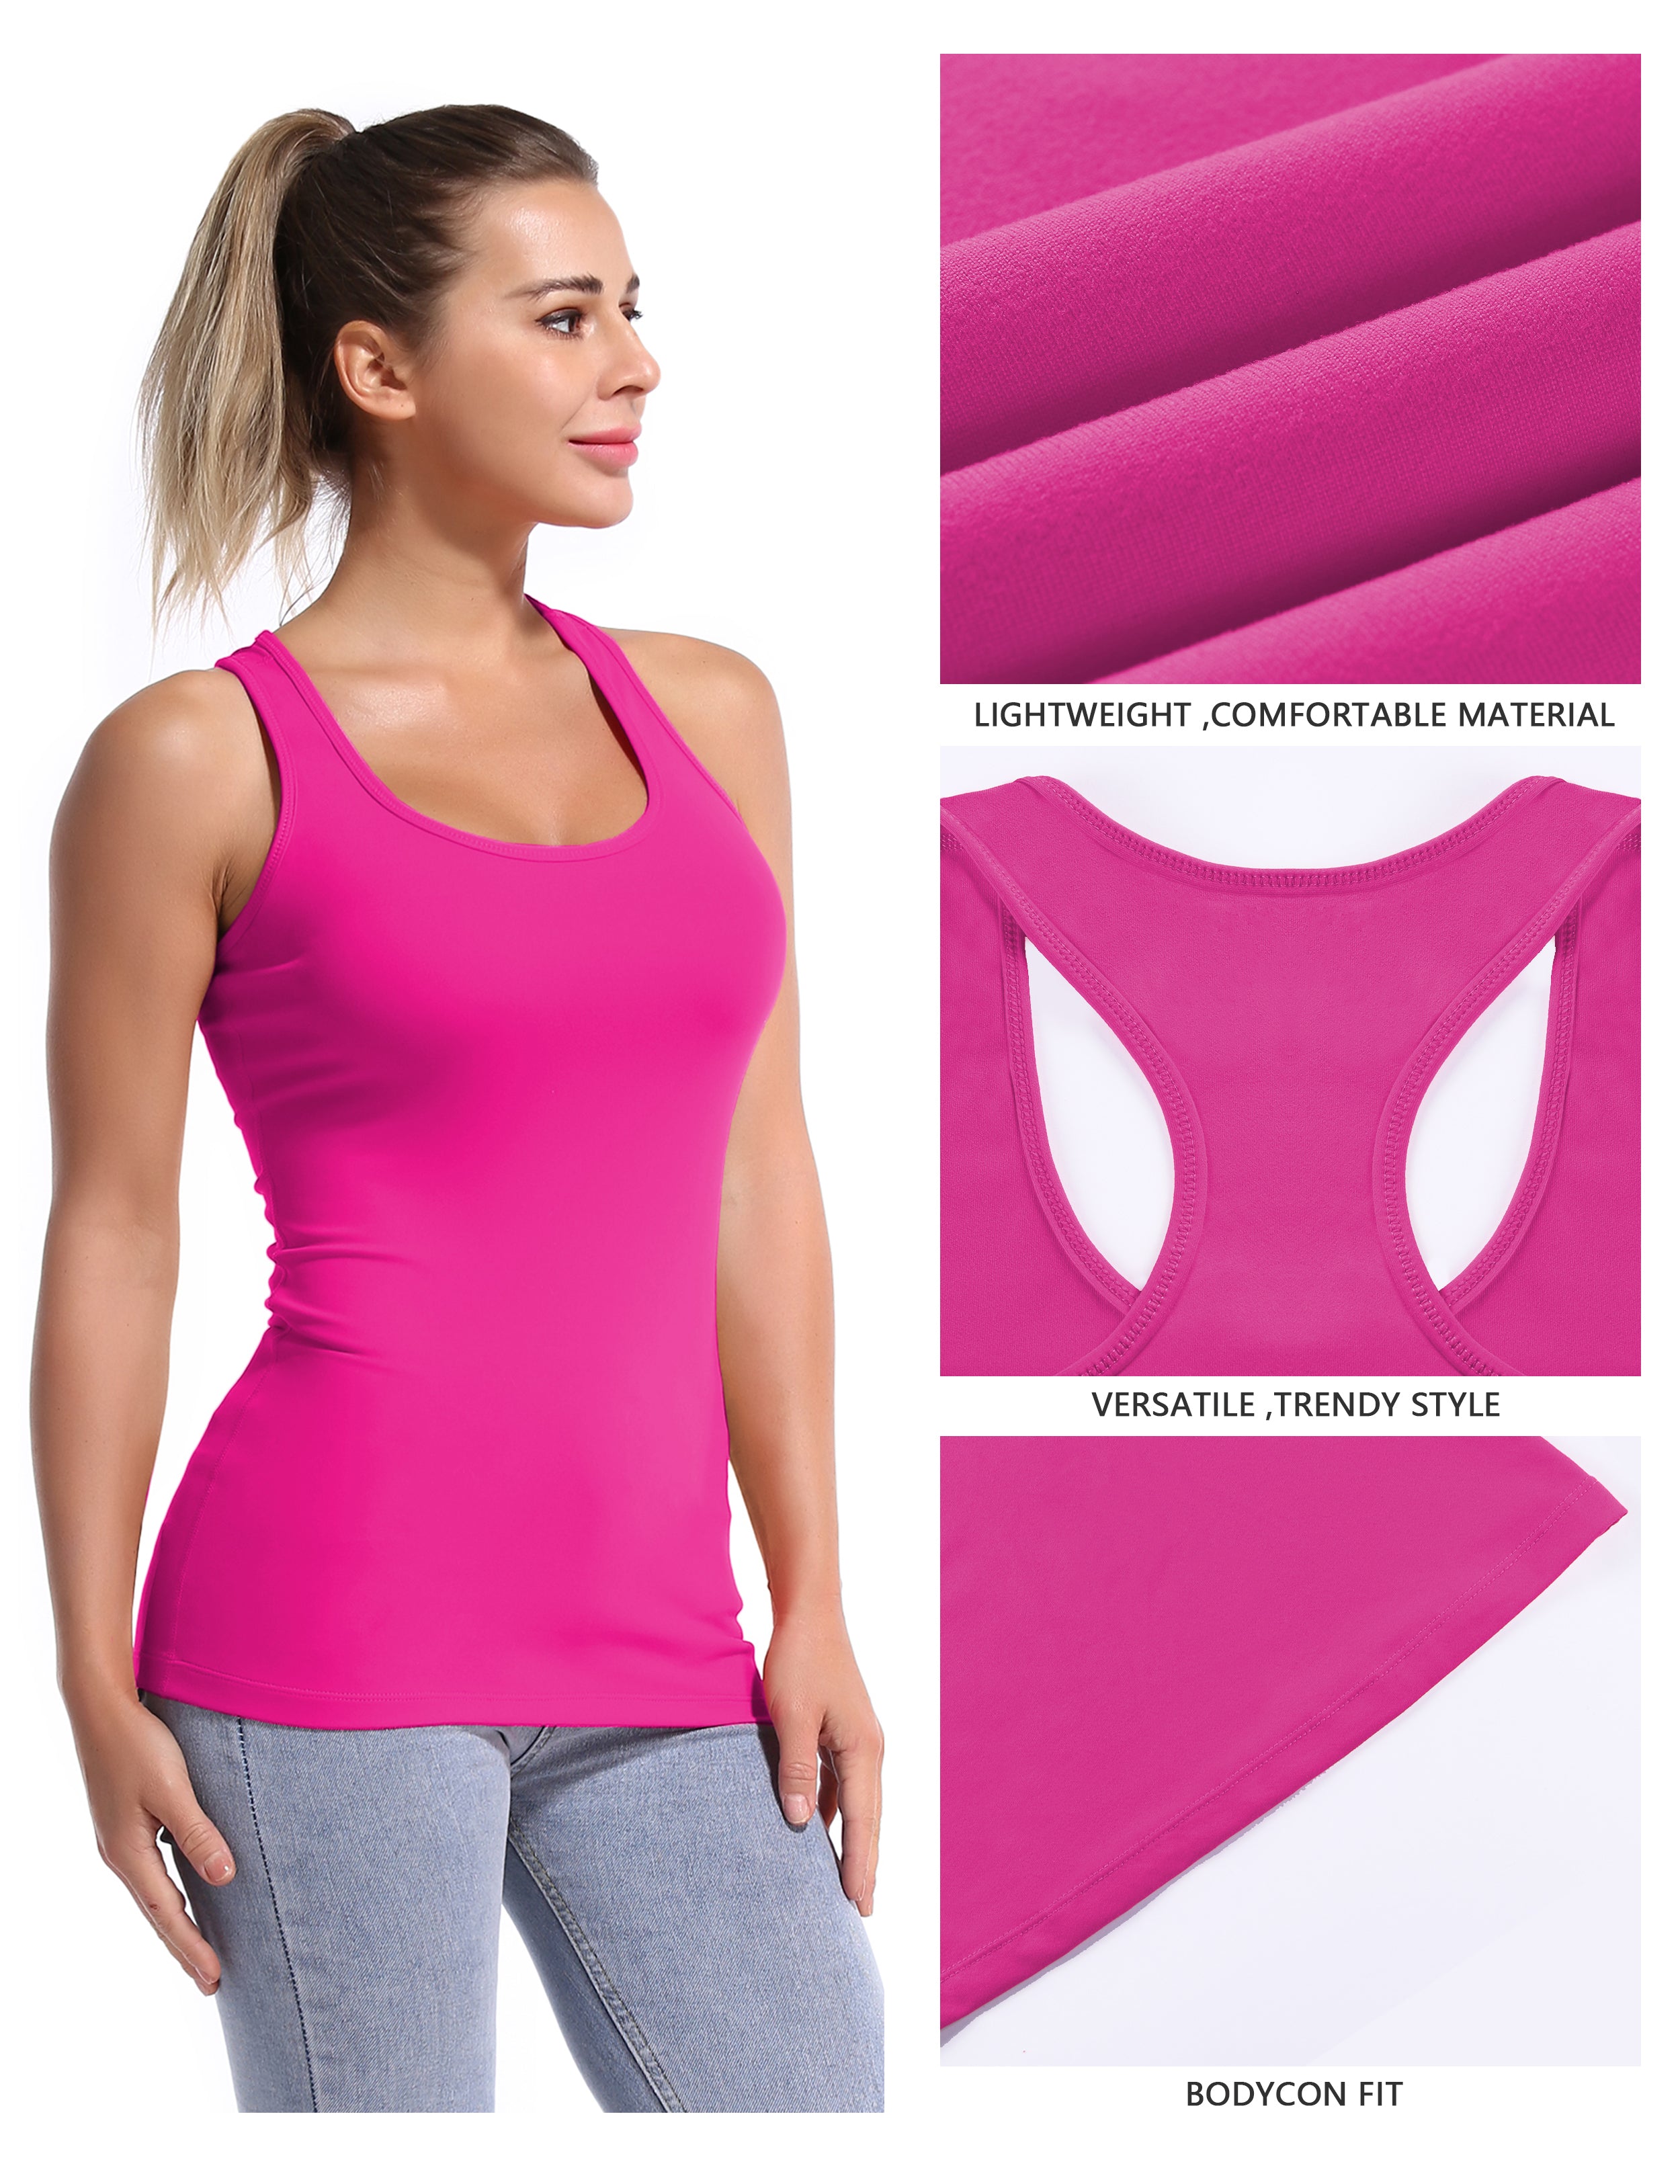 Racerback Athletic Tank Tops magenta 92%Nylon/8%Spandex(Cotton Soft) Designed for Jogging Tight Fit So buttery soft, it feels weightless Sweat-wicking Four-way stretch Breathable Contours your body Sits below the waistband for moderate, everyday coverage